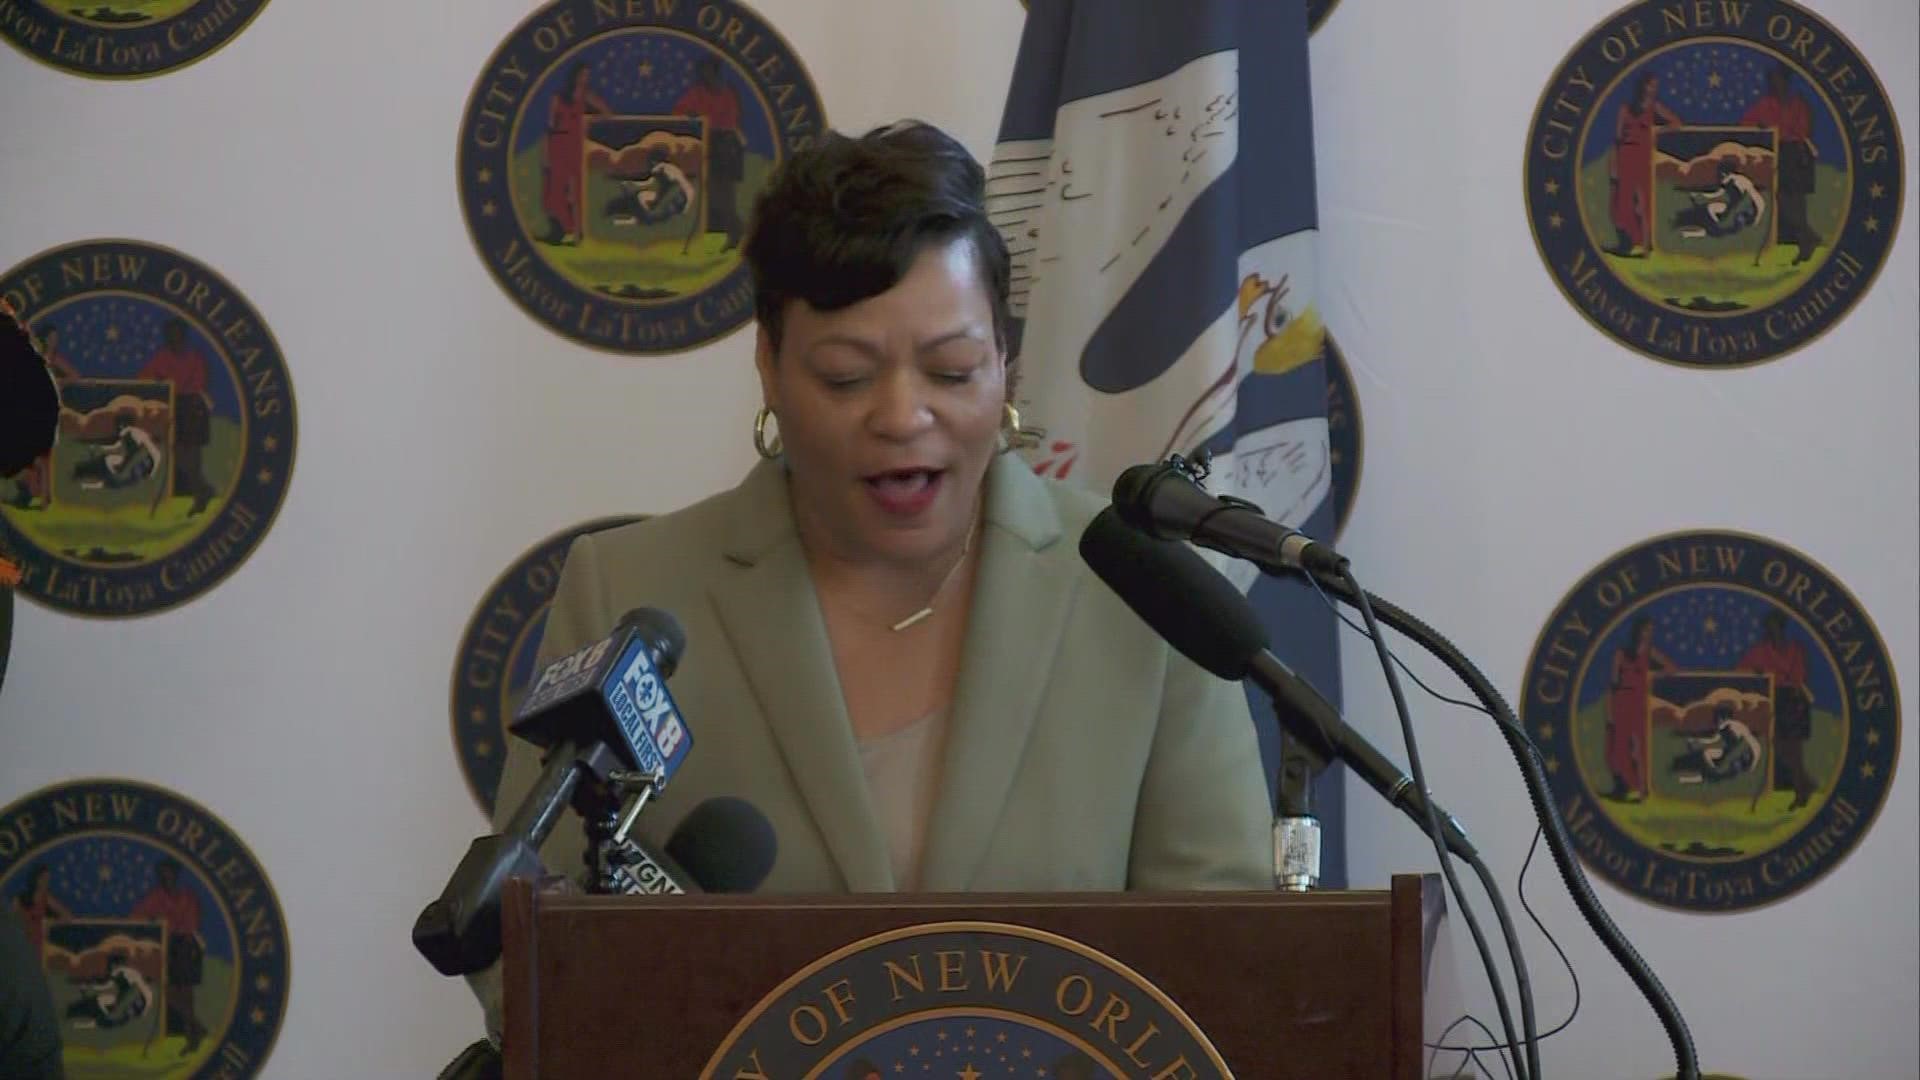 Mayor Cantrell said the efforts to get law enforcement help worked to the point that krewes can return to their traditional routes.